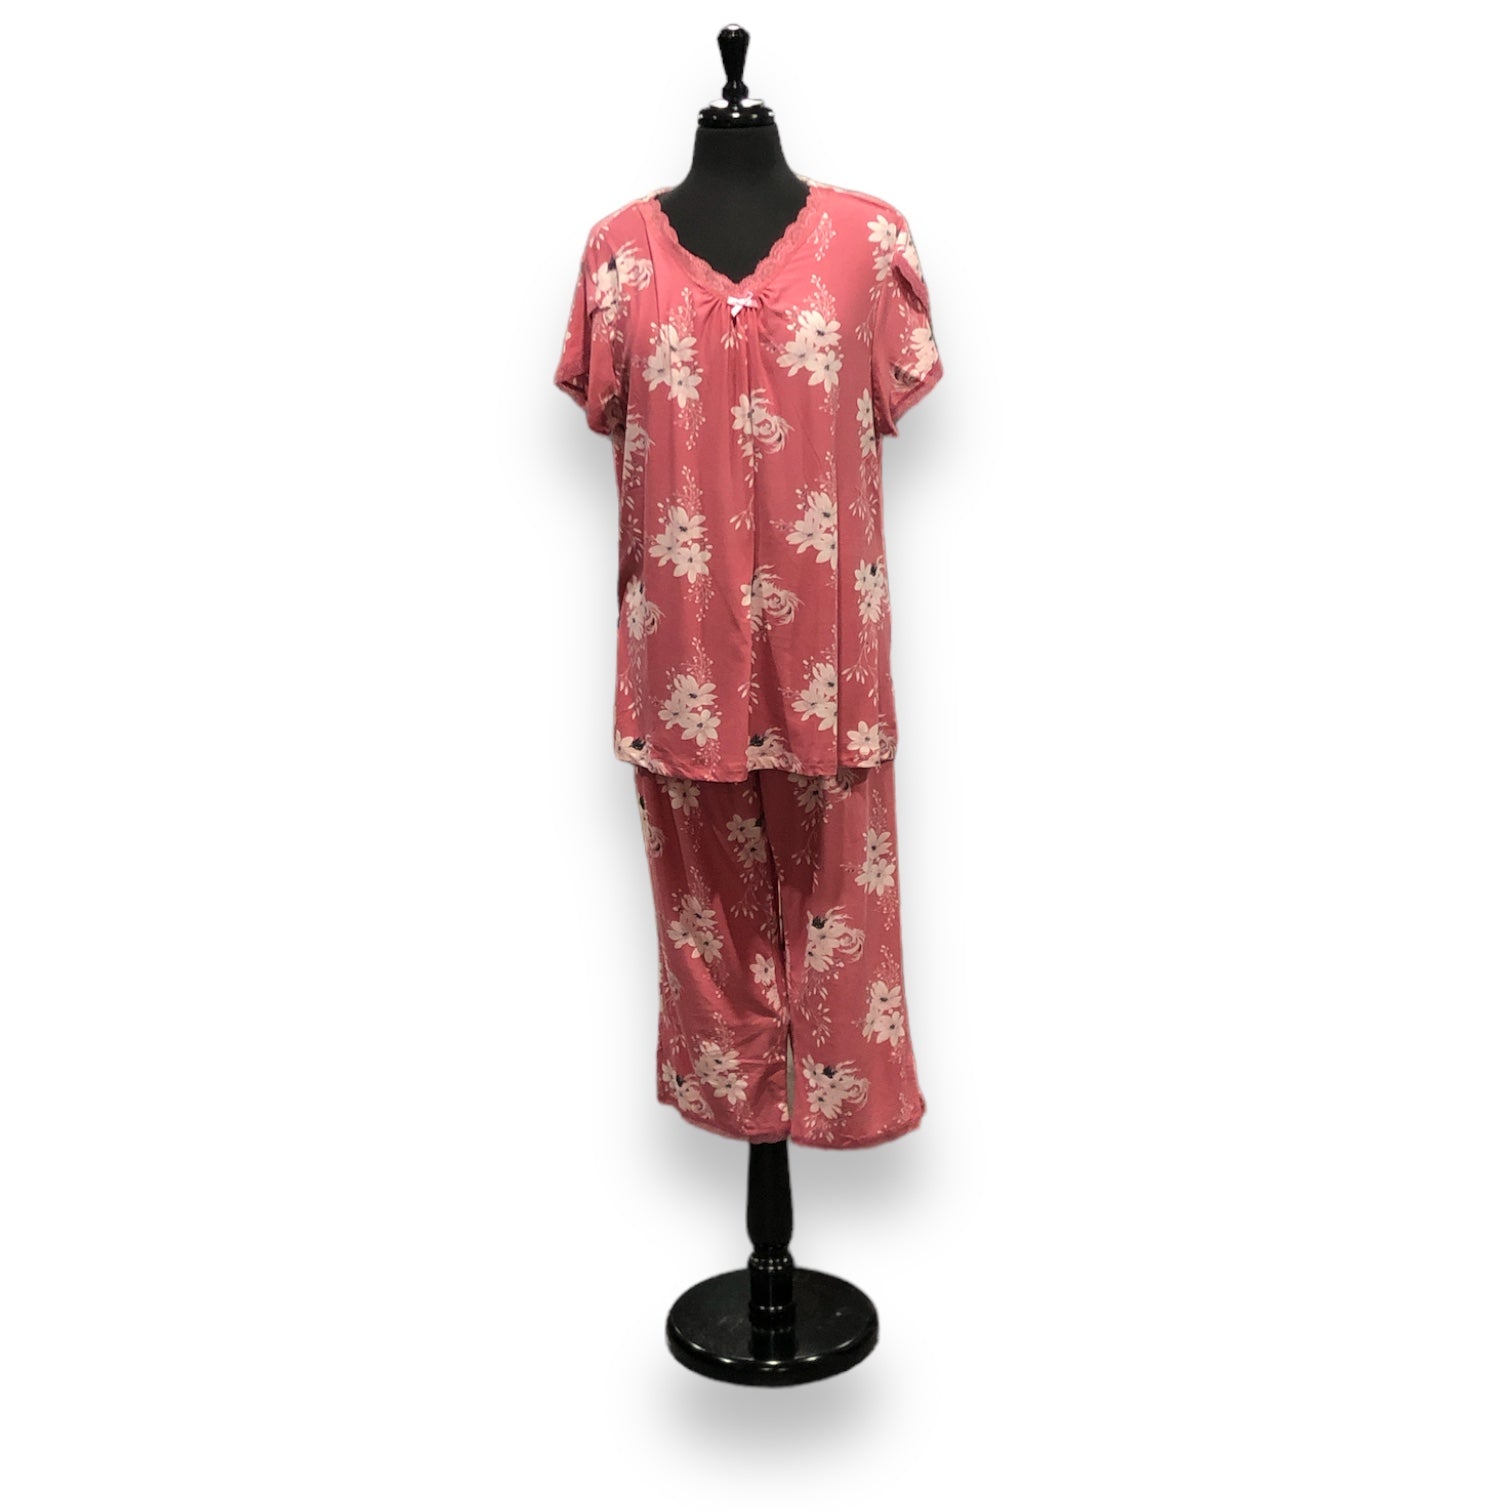 BULK BUY - Women's Peached Jersey Knit Pajama Set with Lace Trim & Satin Bow (3-Pack)